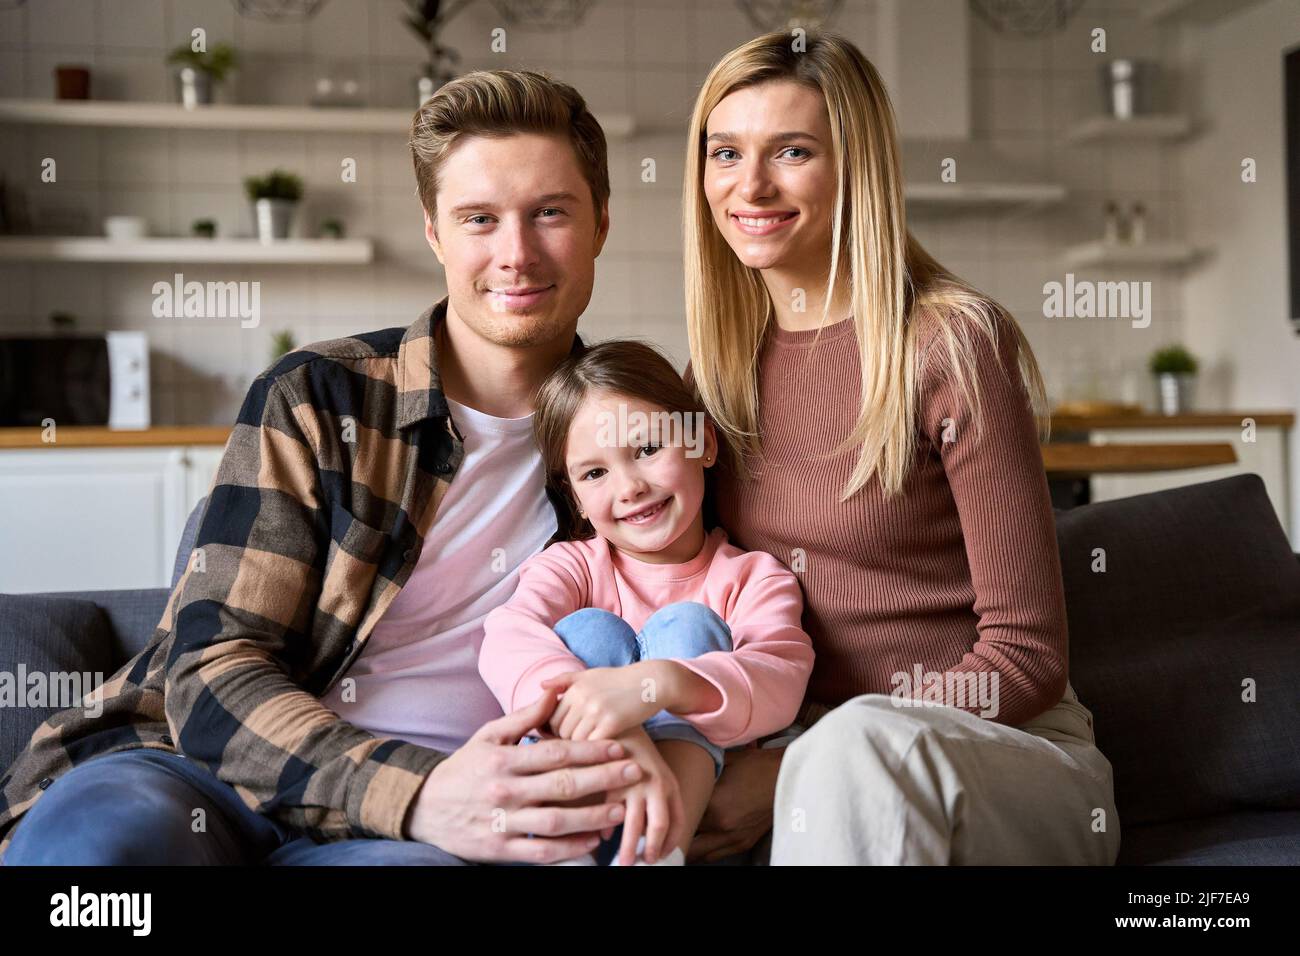 Happy family couple and child daughter bonding sitting on couch at home. Stock Photo